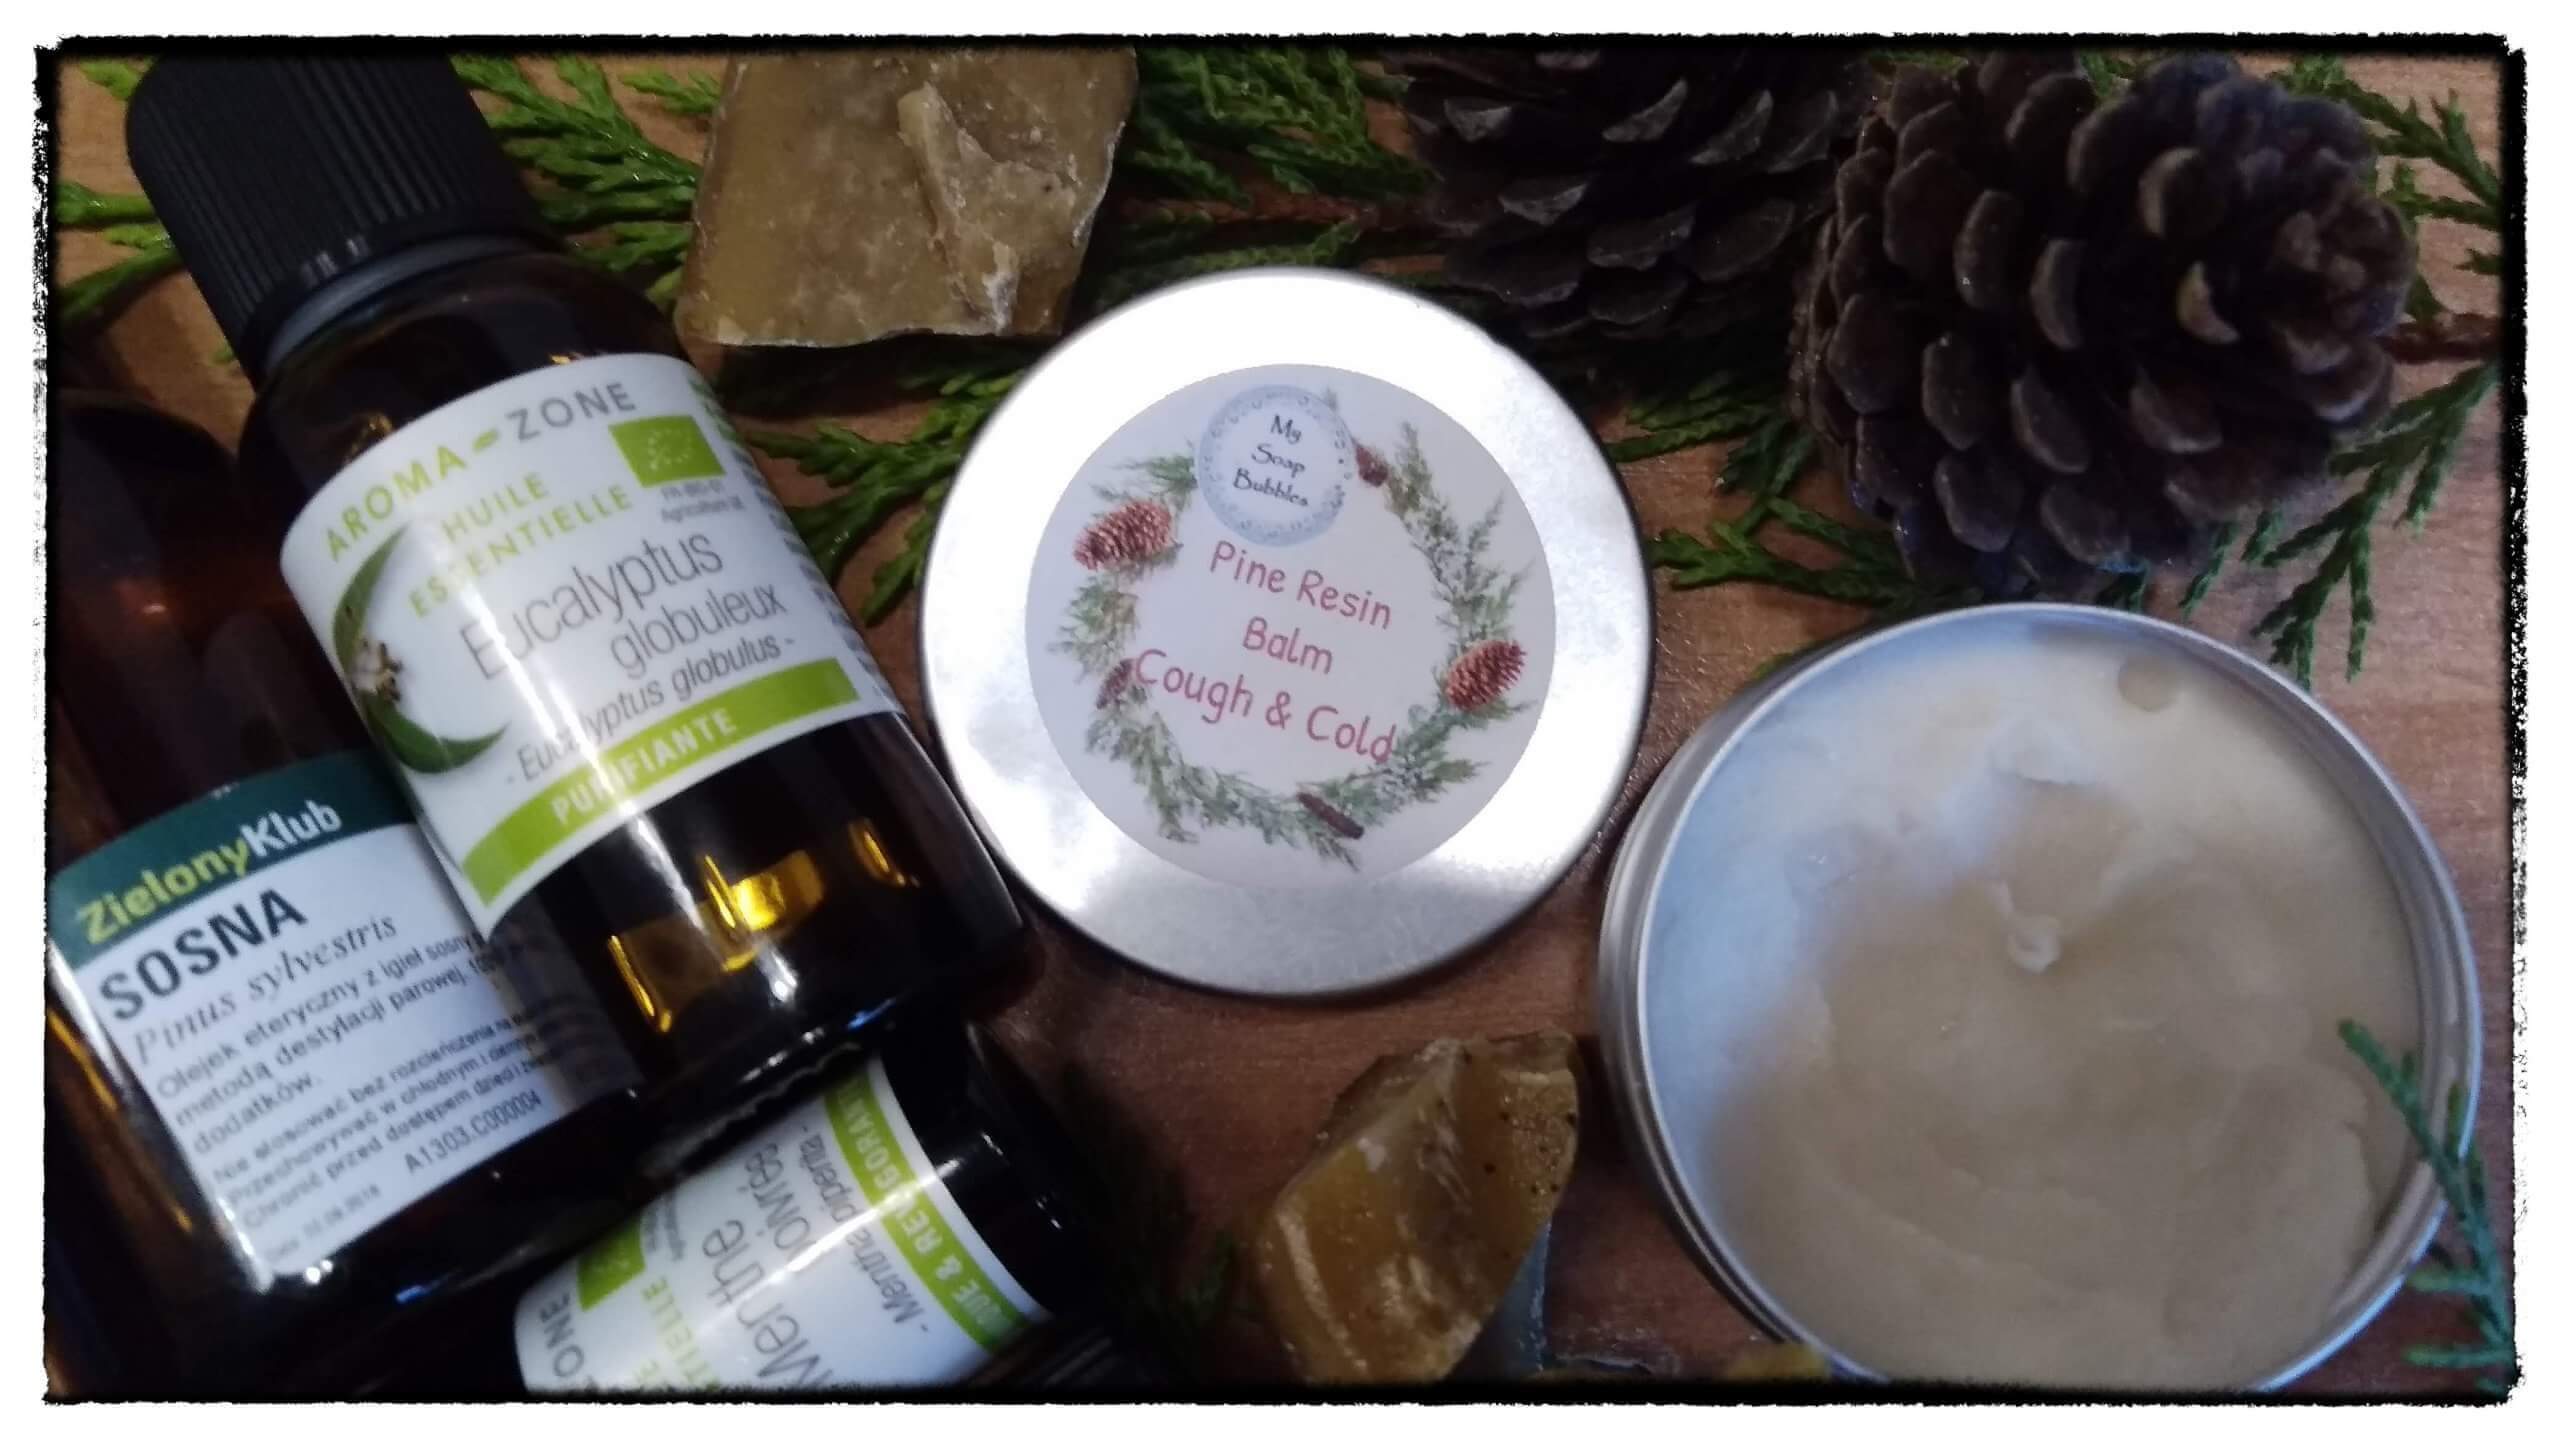 Pine Resin Balm for Cold and Flu